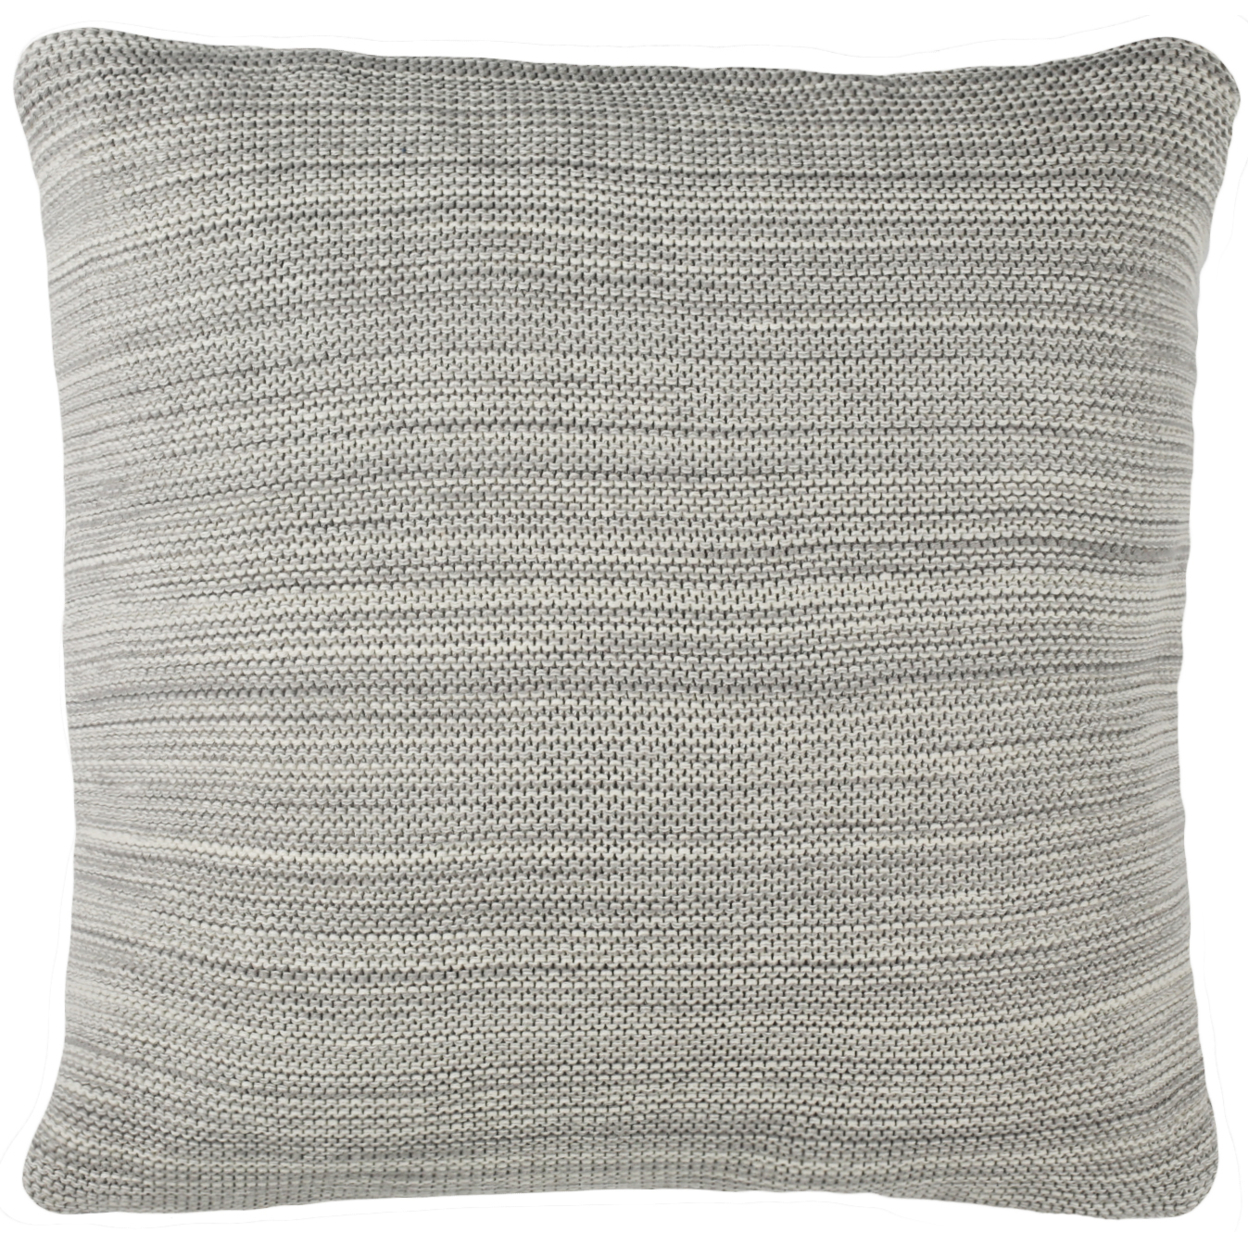 SAFAVIEH Loveable Knit Pillow Grey